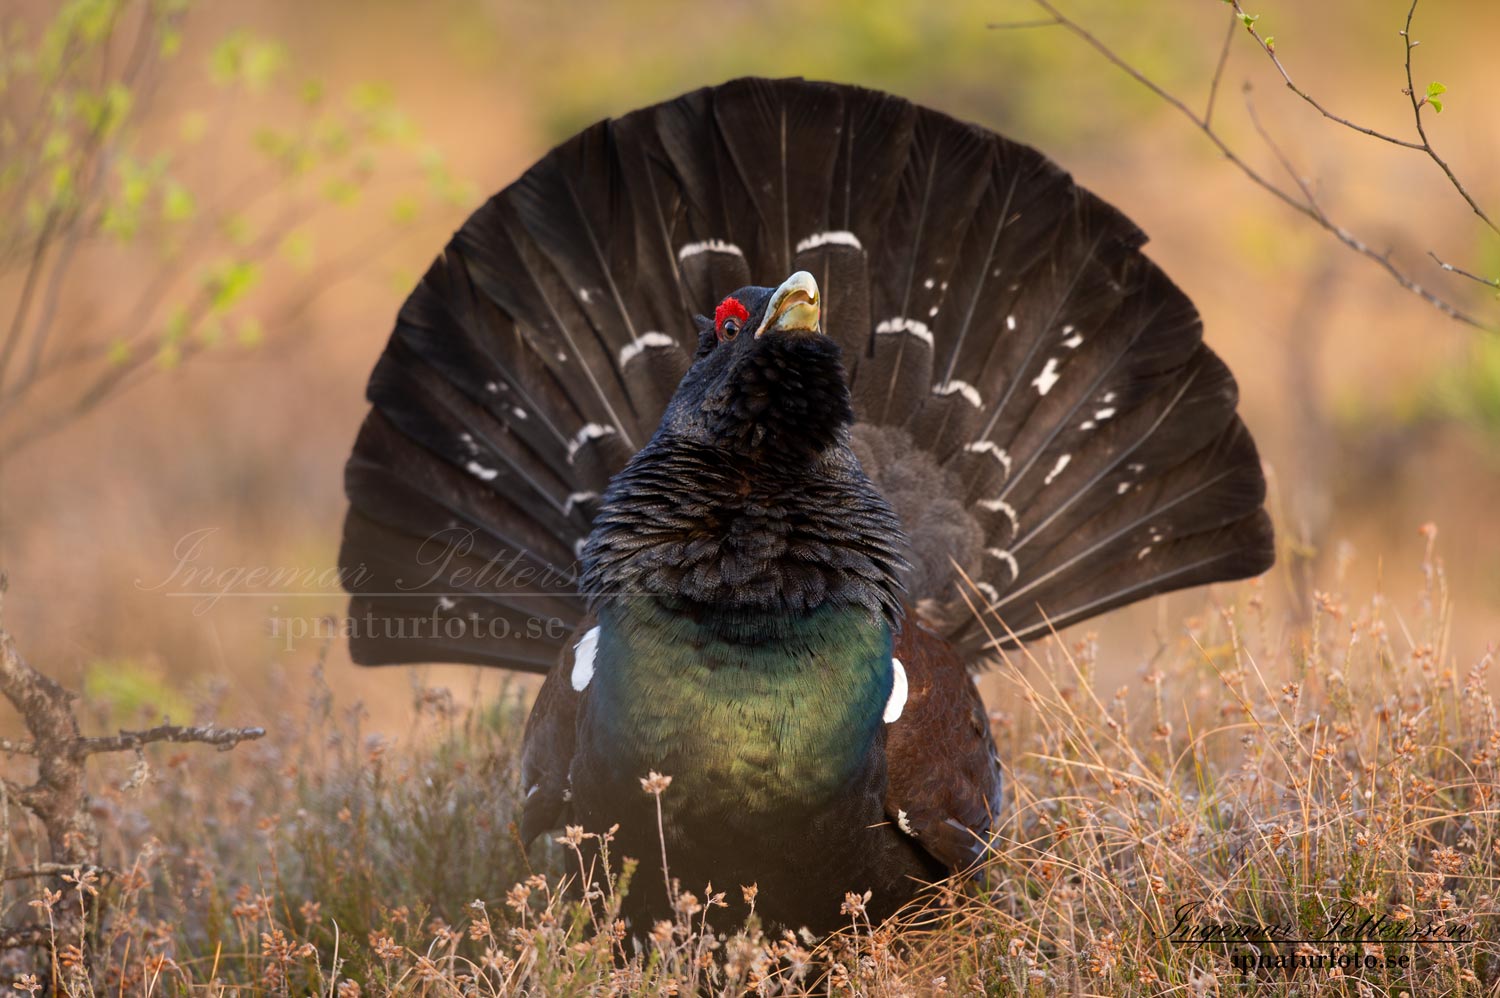 tjader_ipnaturfoto_capercaillie_se_forest_fo621